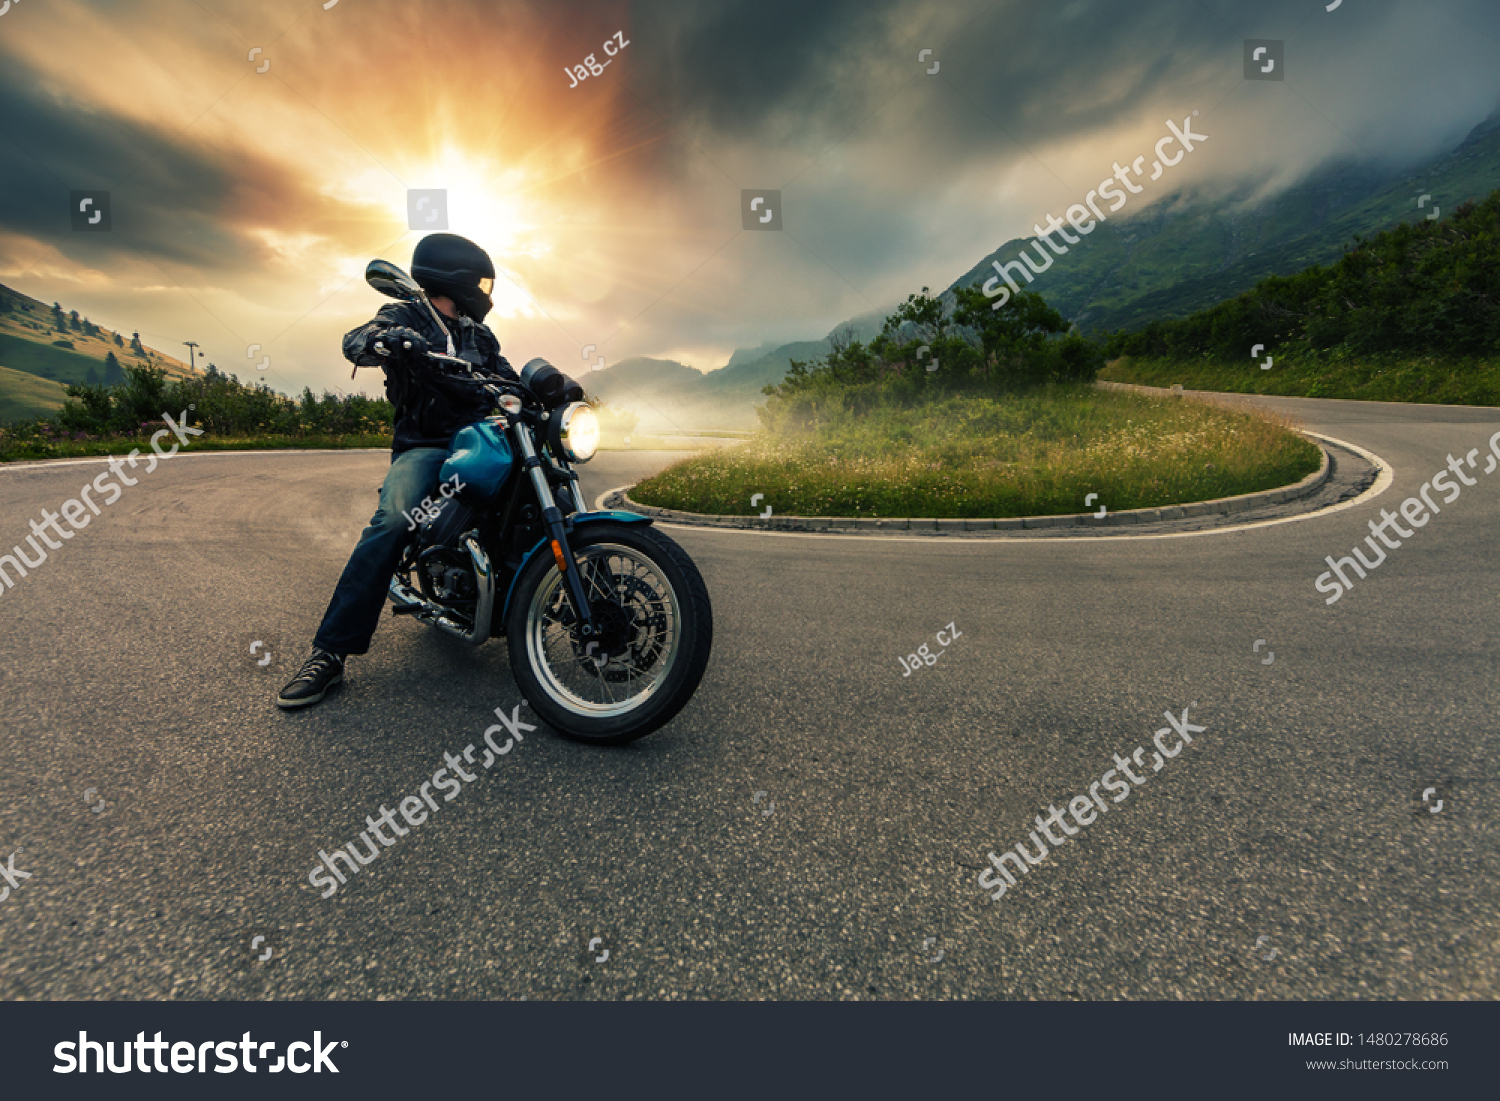 Motorcycle driver posing in Alpine landscape. Lifestyle photo with motion blur effect. #1480278686